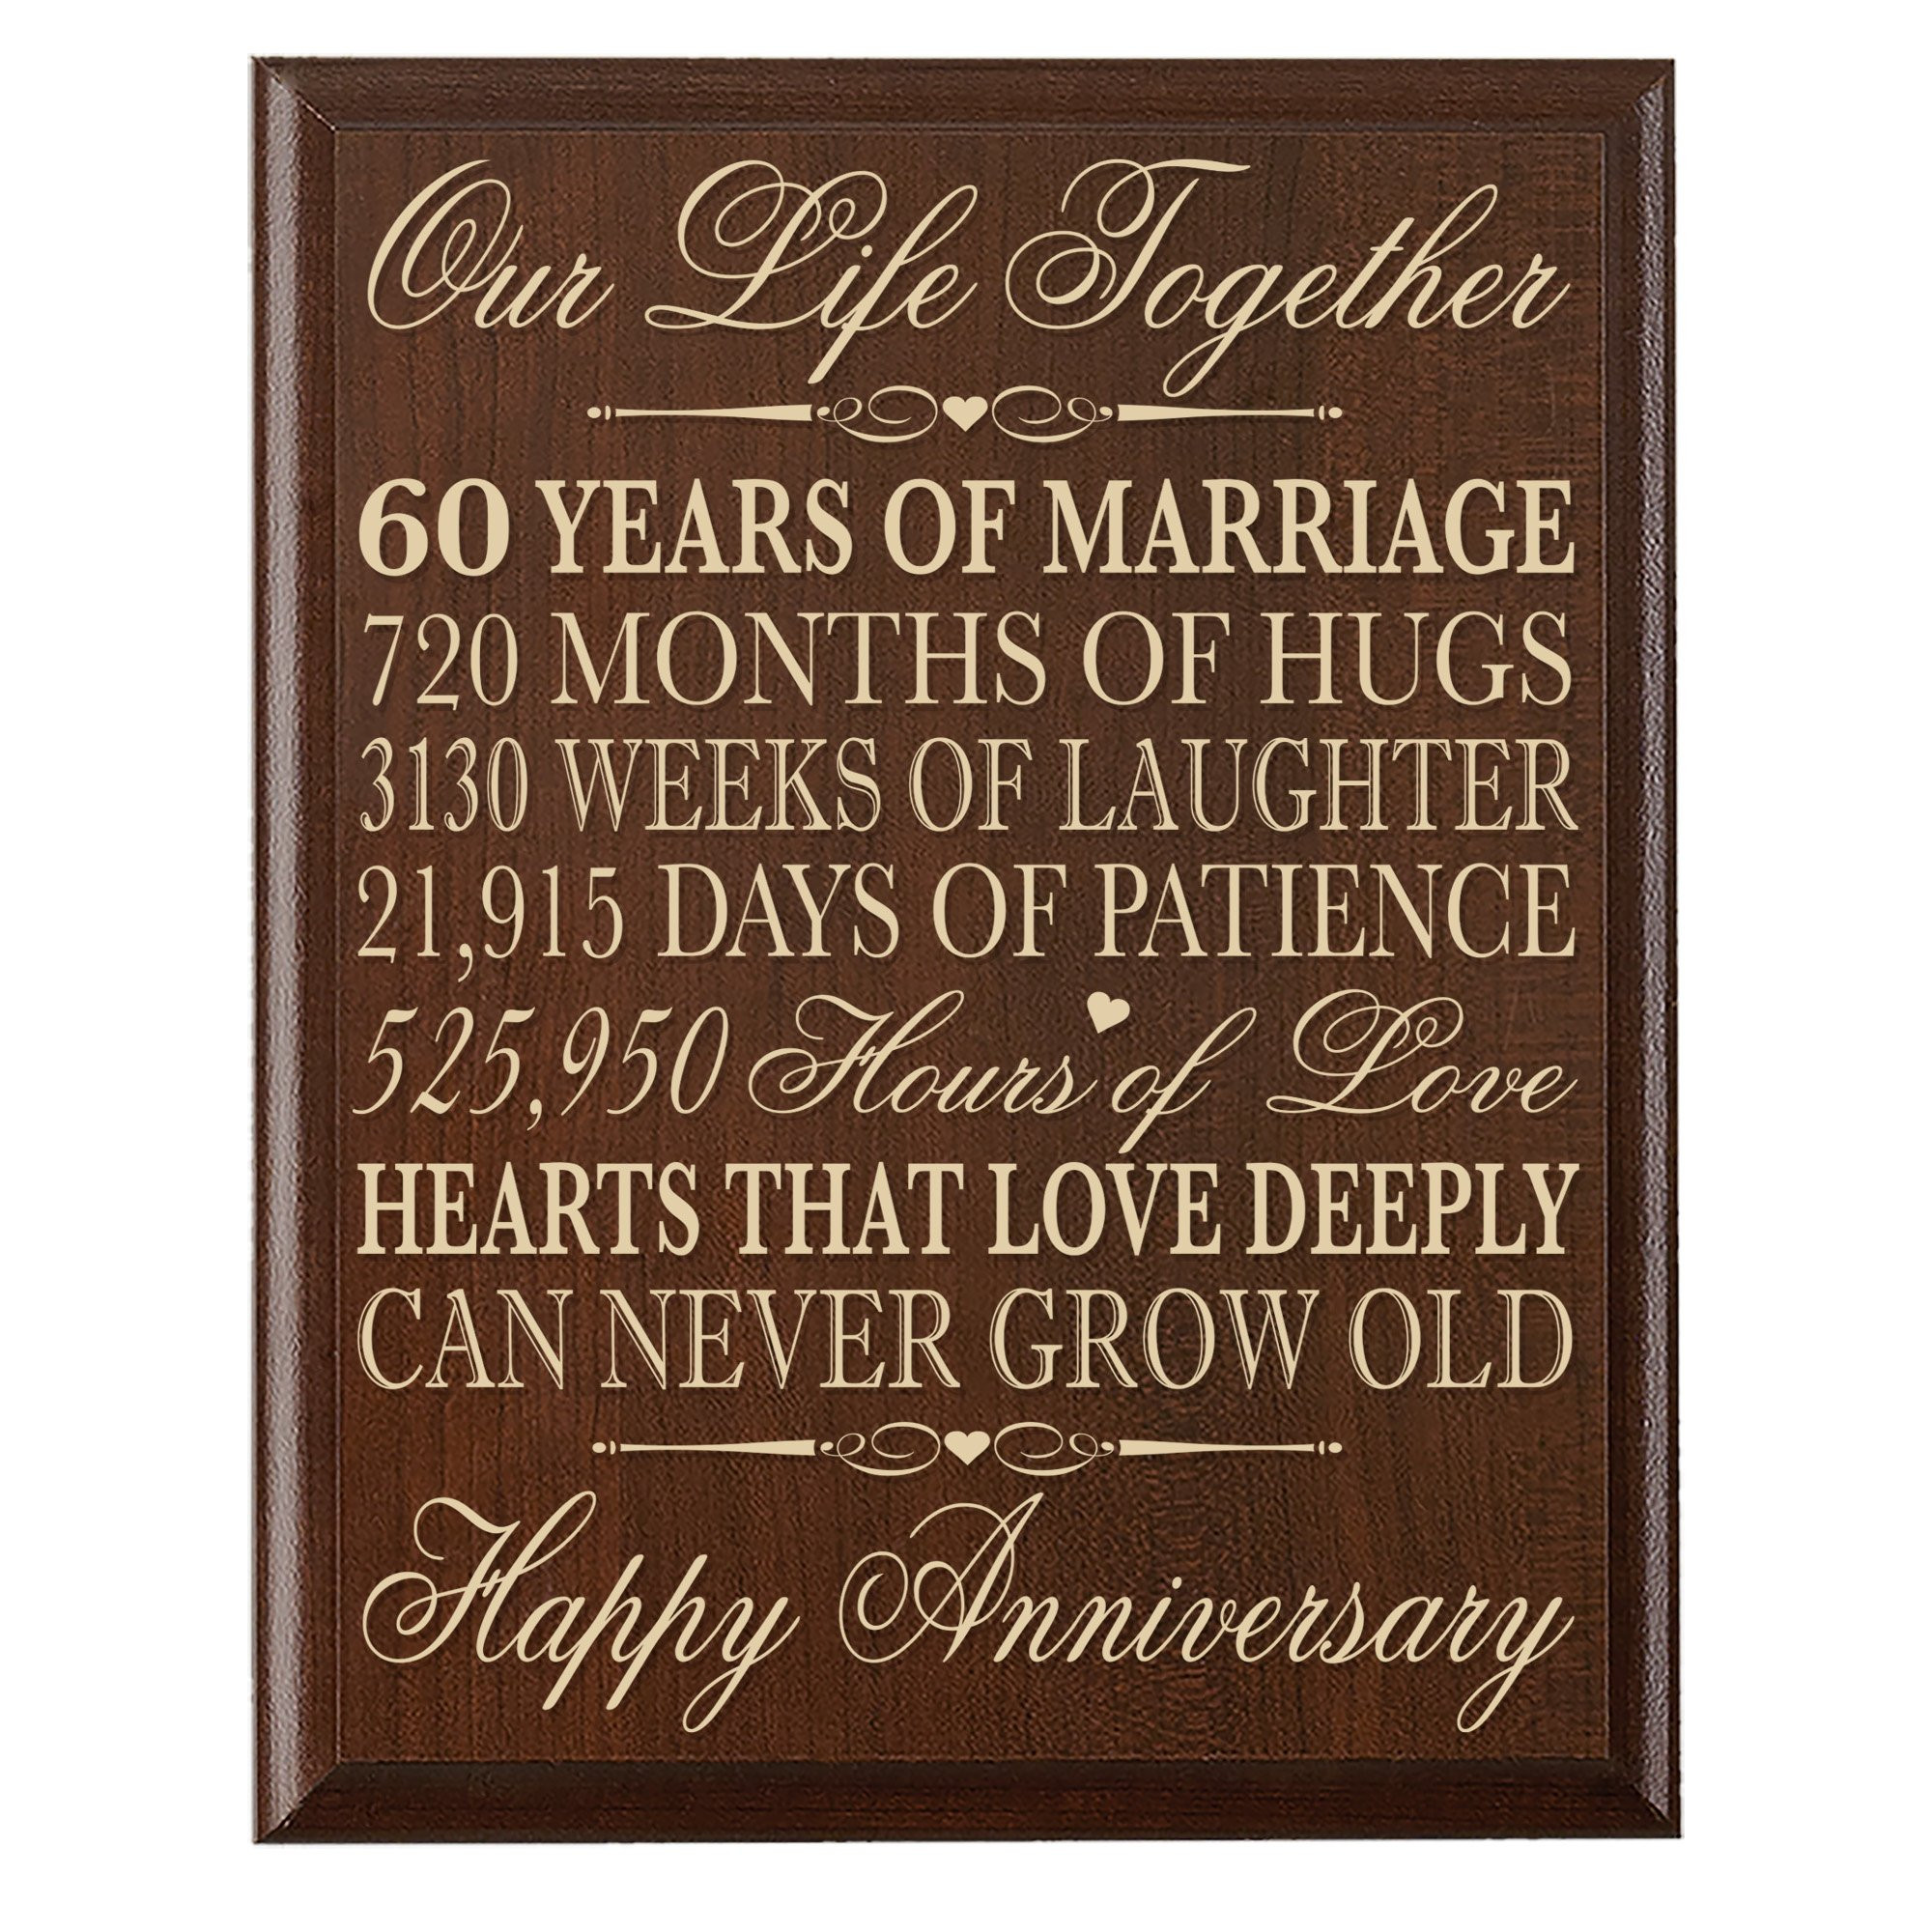 60Th Wedding Anniversary Gift Ideas
 60th Wedding Anniversary Wall Plaque Gifts for Couple